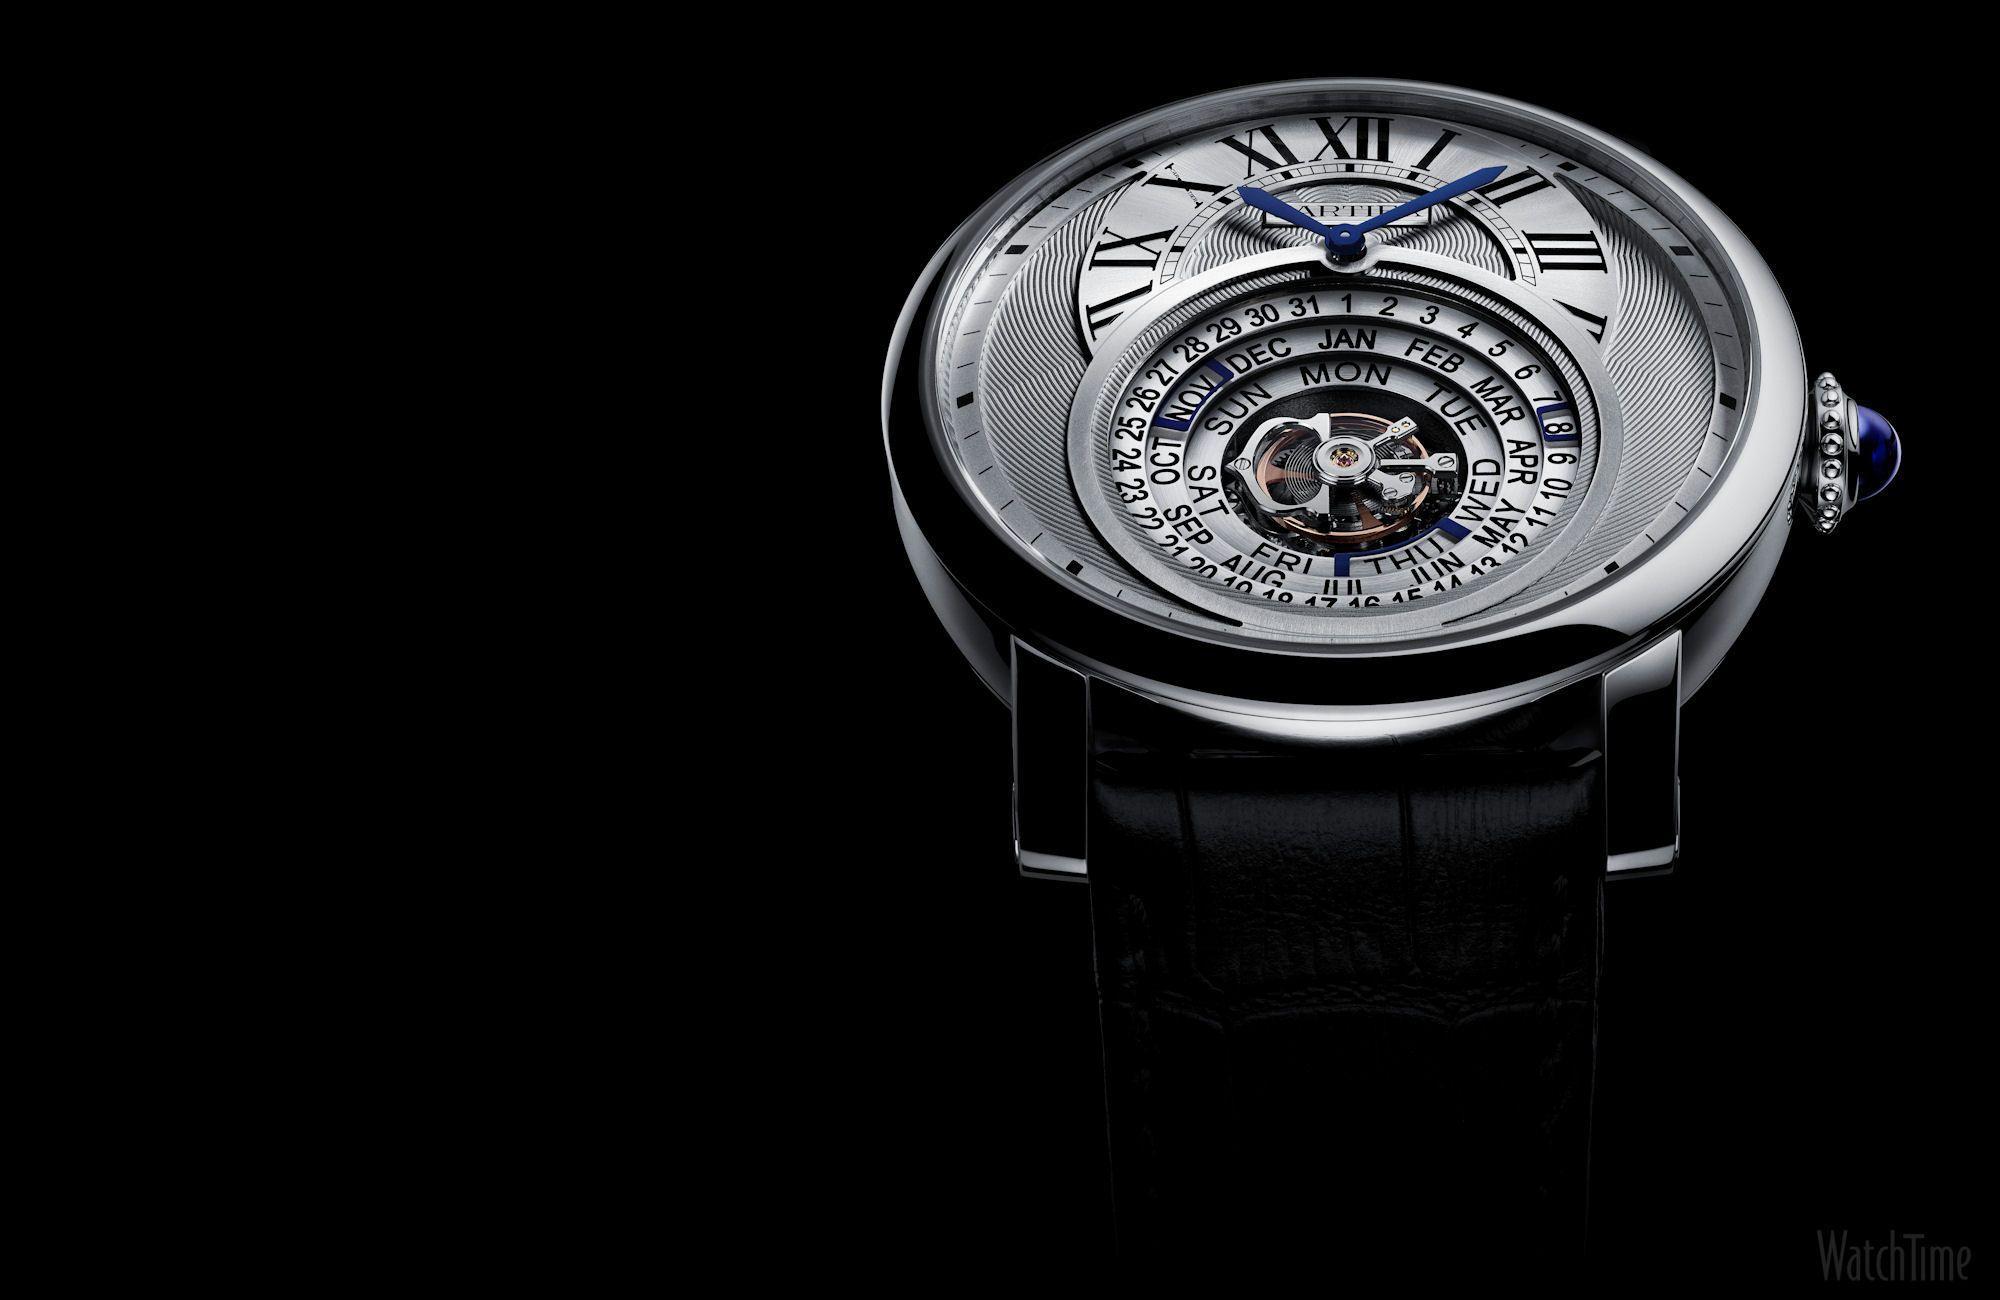 Watch Wallpaper: 11 Cartier Watches from SIHH › WatchTime&;s